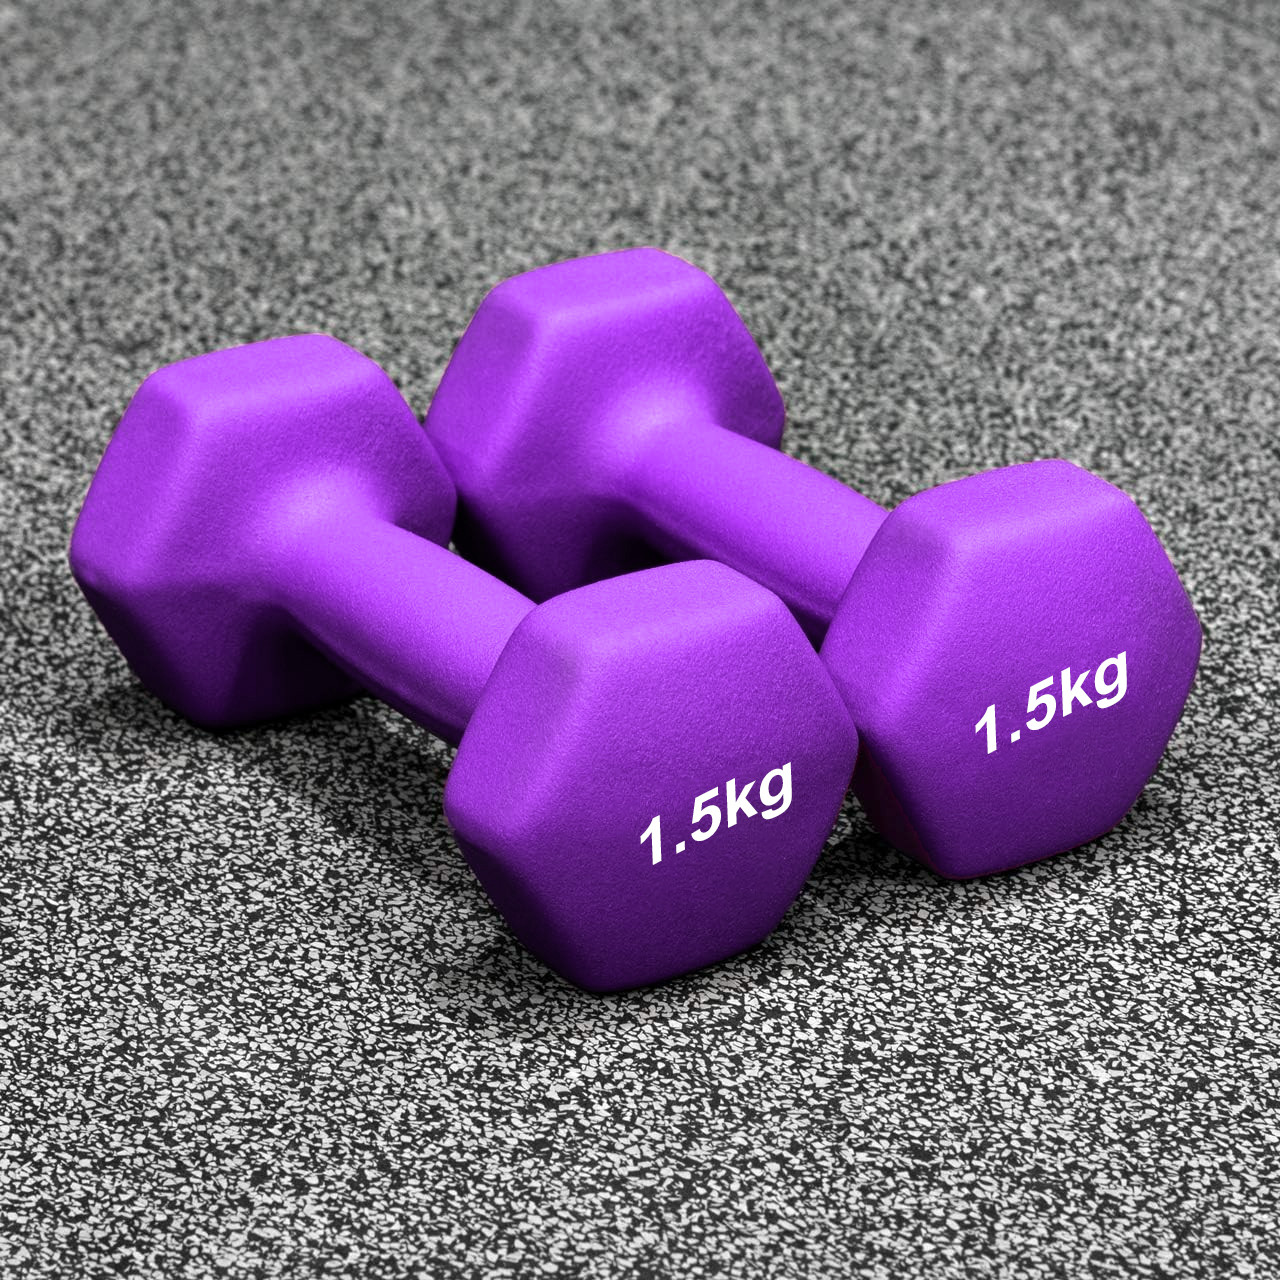 YALLA HomeGym Neoprene Dumbbells, Set of 6 Hand Weights for Men &amp; Women, Non-Slip Grip, Strength Training Free Weights for Home Gym